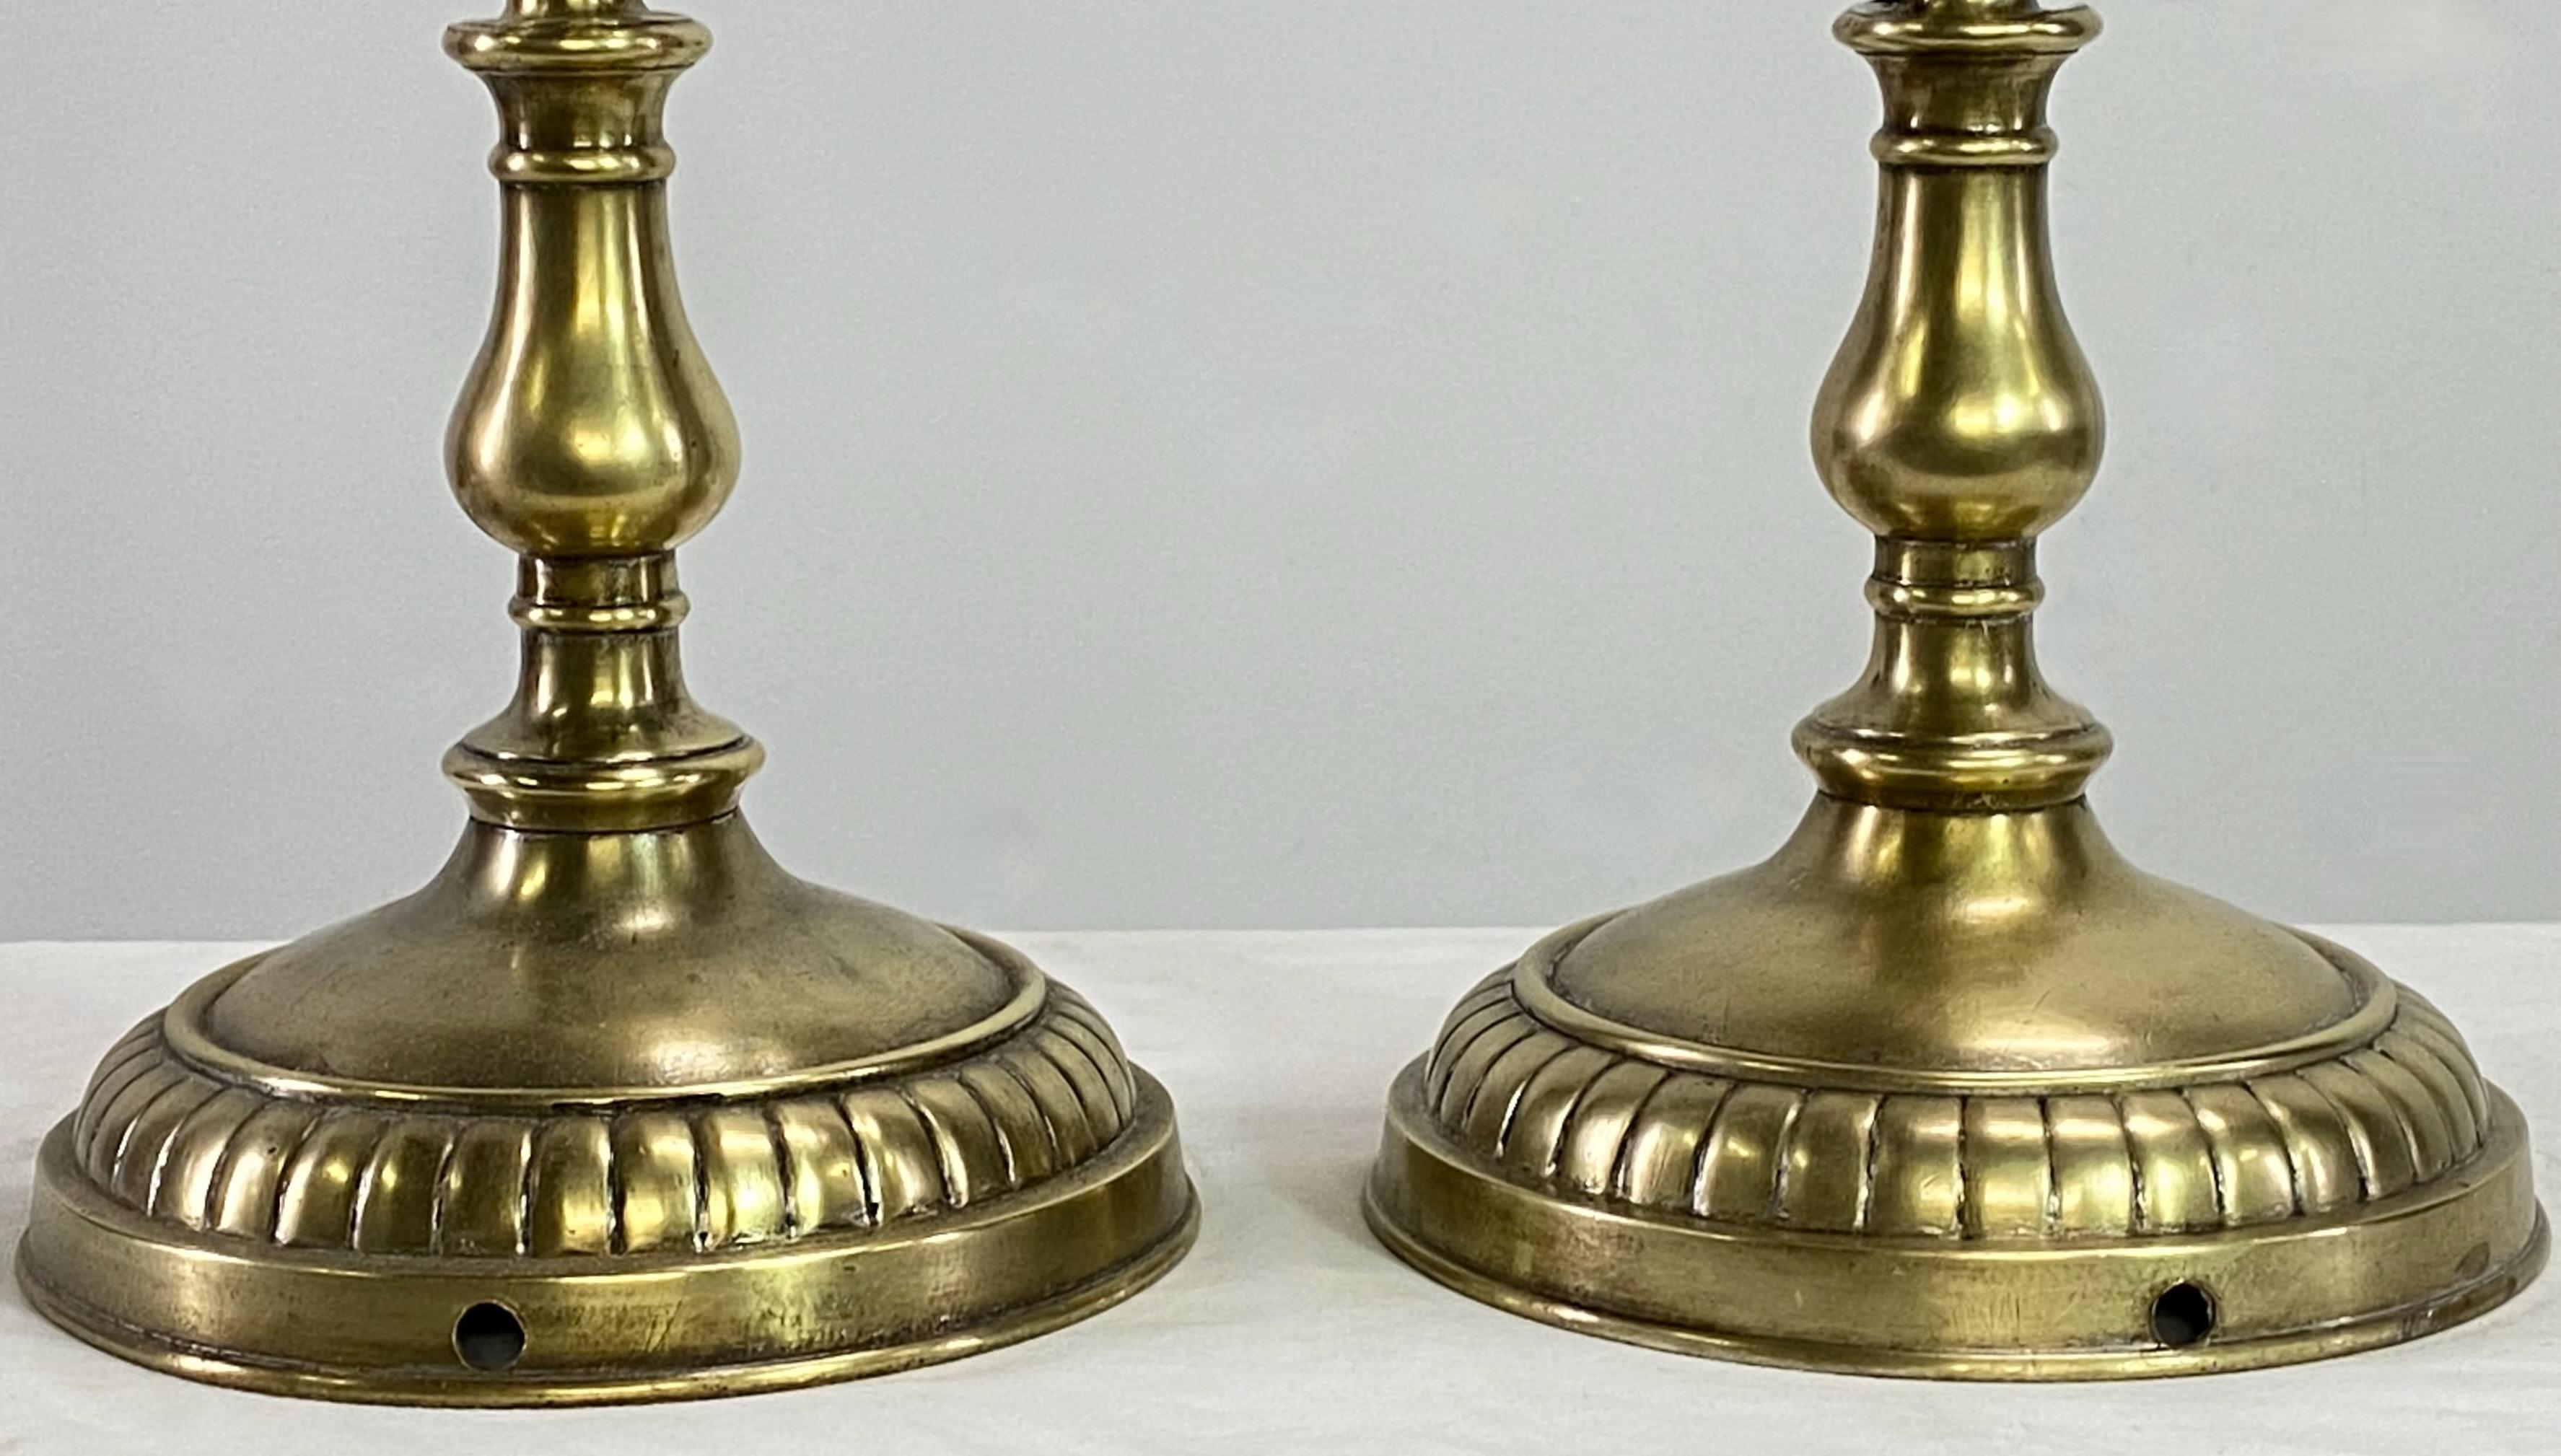 Pair of Early 19th Century European Brass Candlesticks, circa 1840 For Sale 9